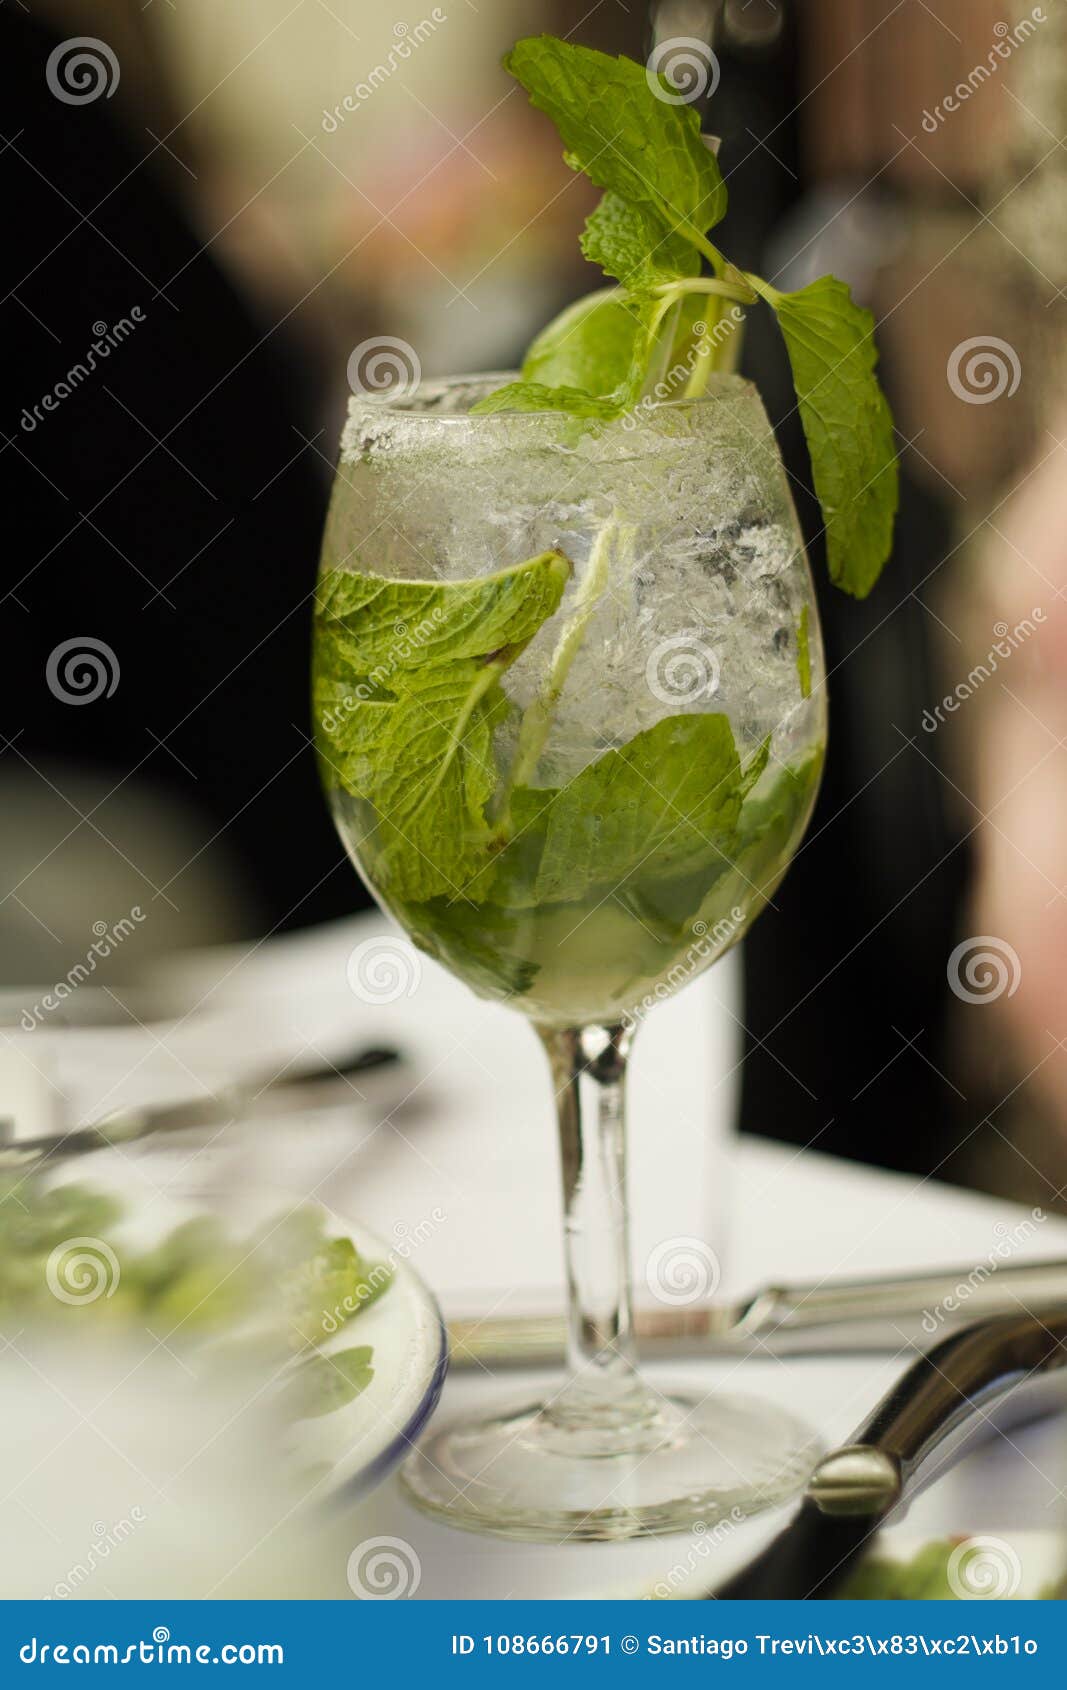 mojito cubano or caipirinha cocktail, iced drink with lime and mint